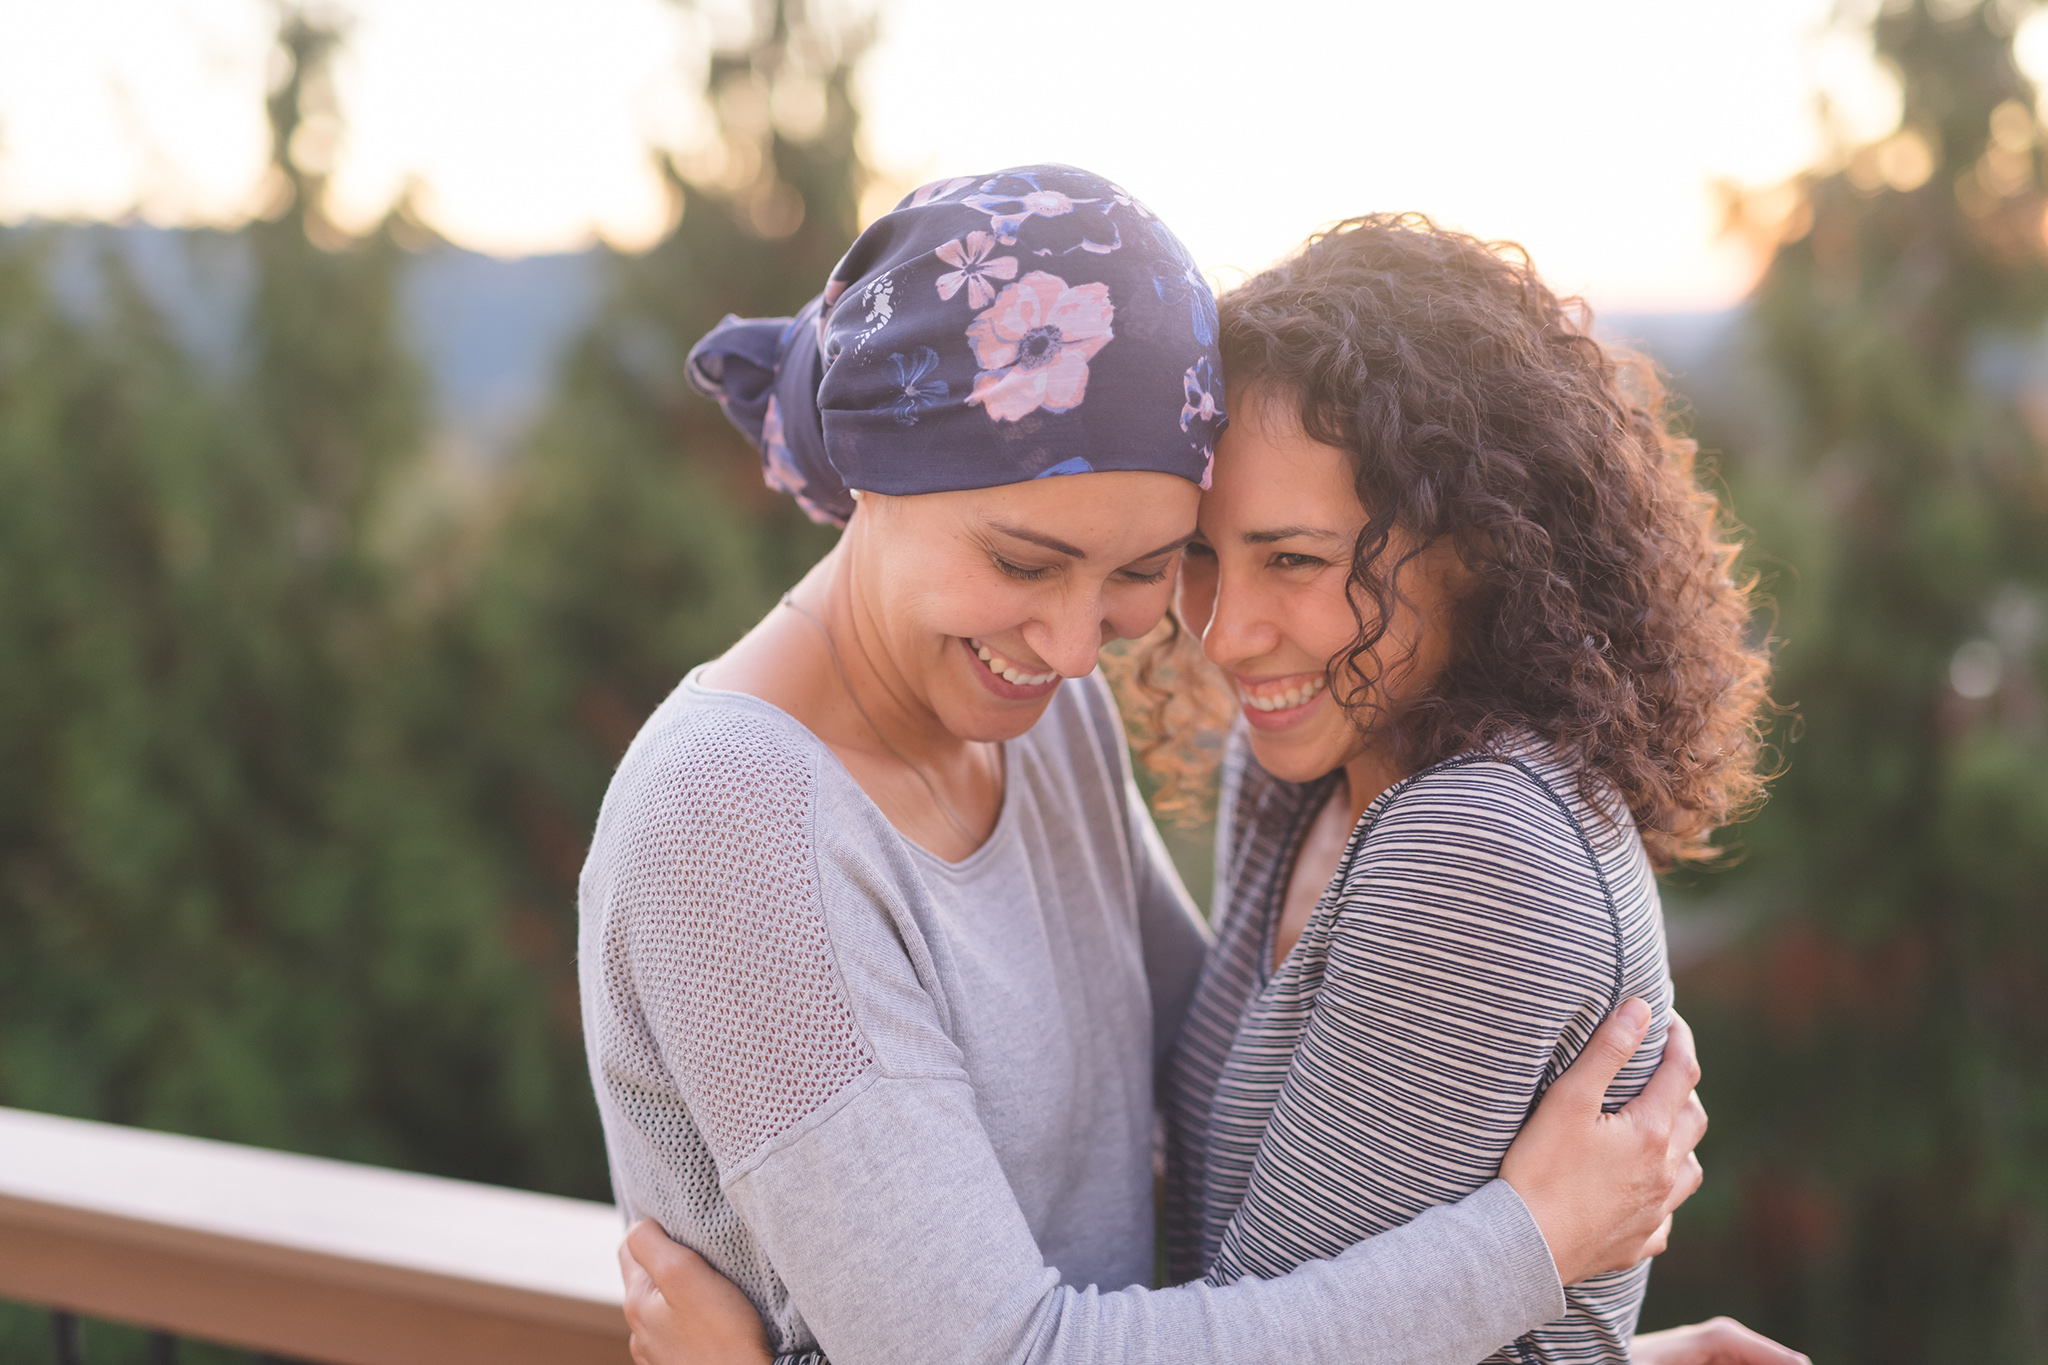 Woman cancer patient with scarf hugging another woman